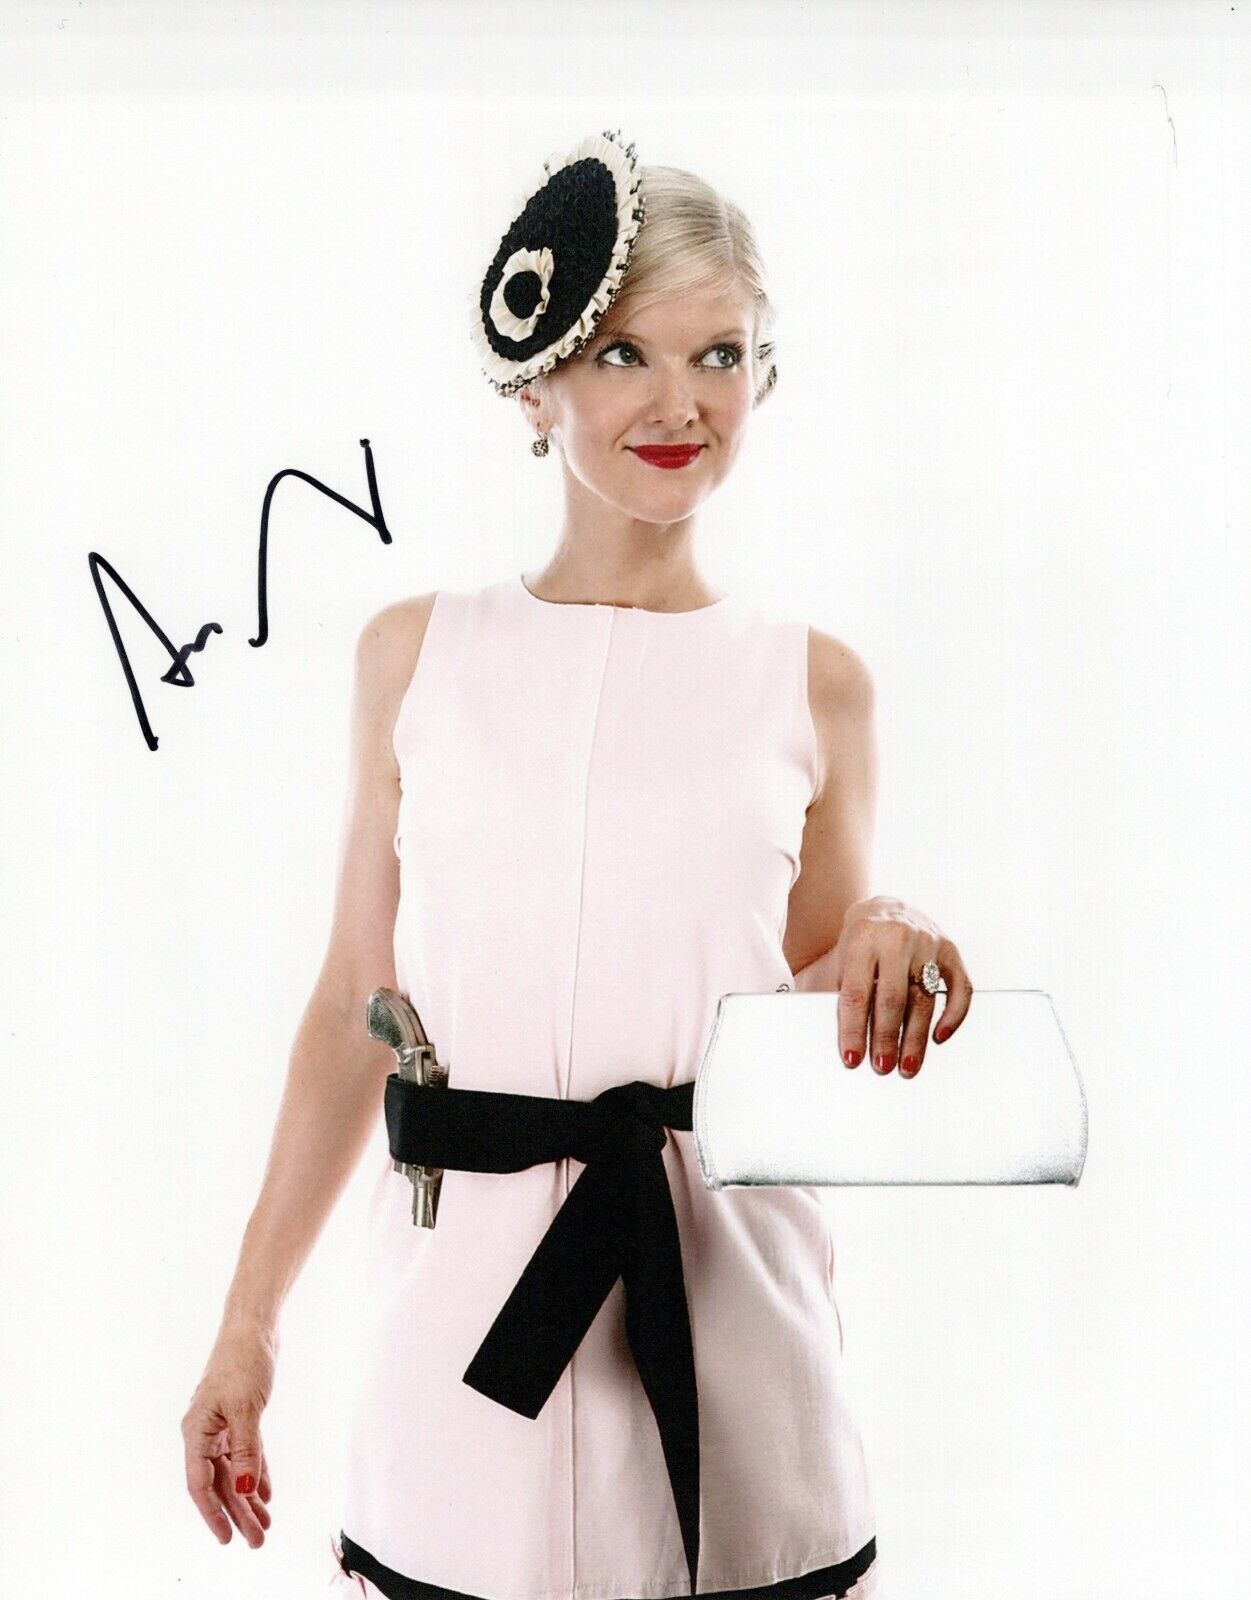 Arden Myrin glamour shot autographed Photo Poster painting signed 8x10 #1